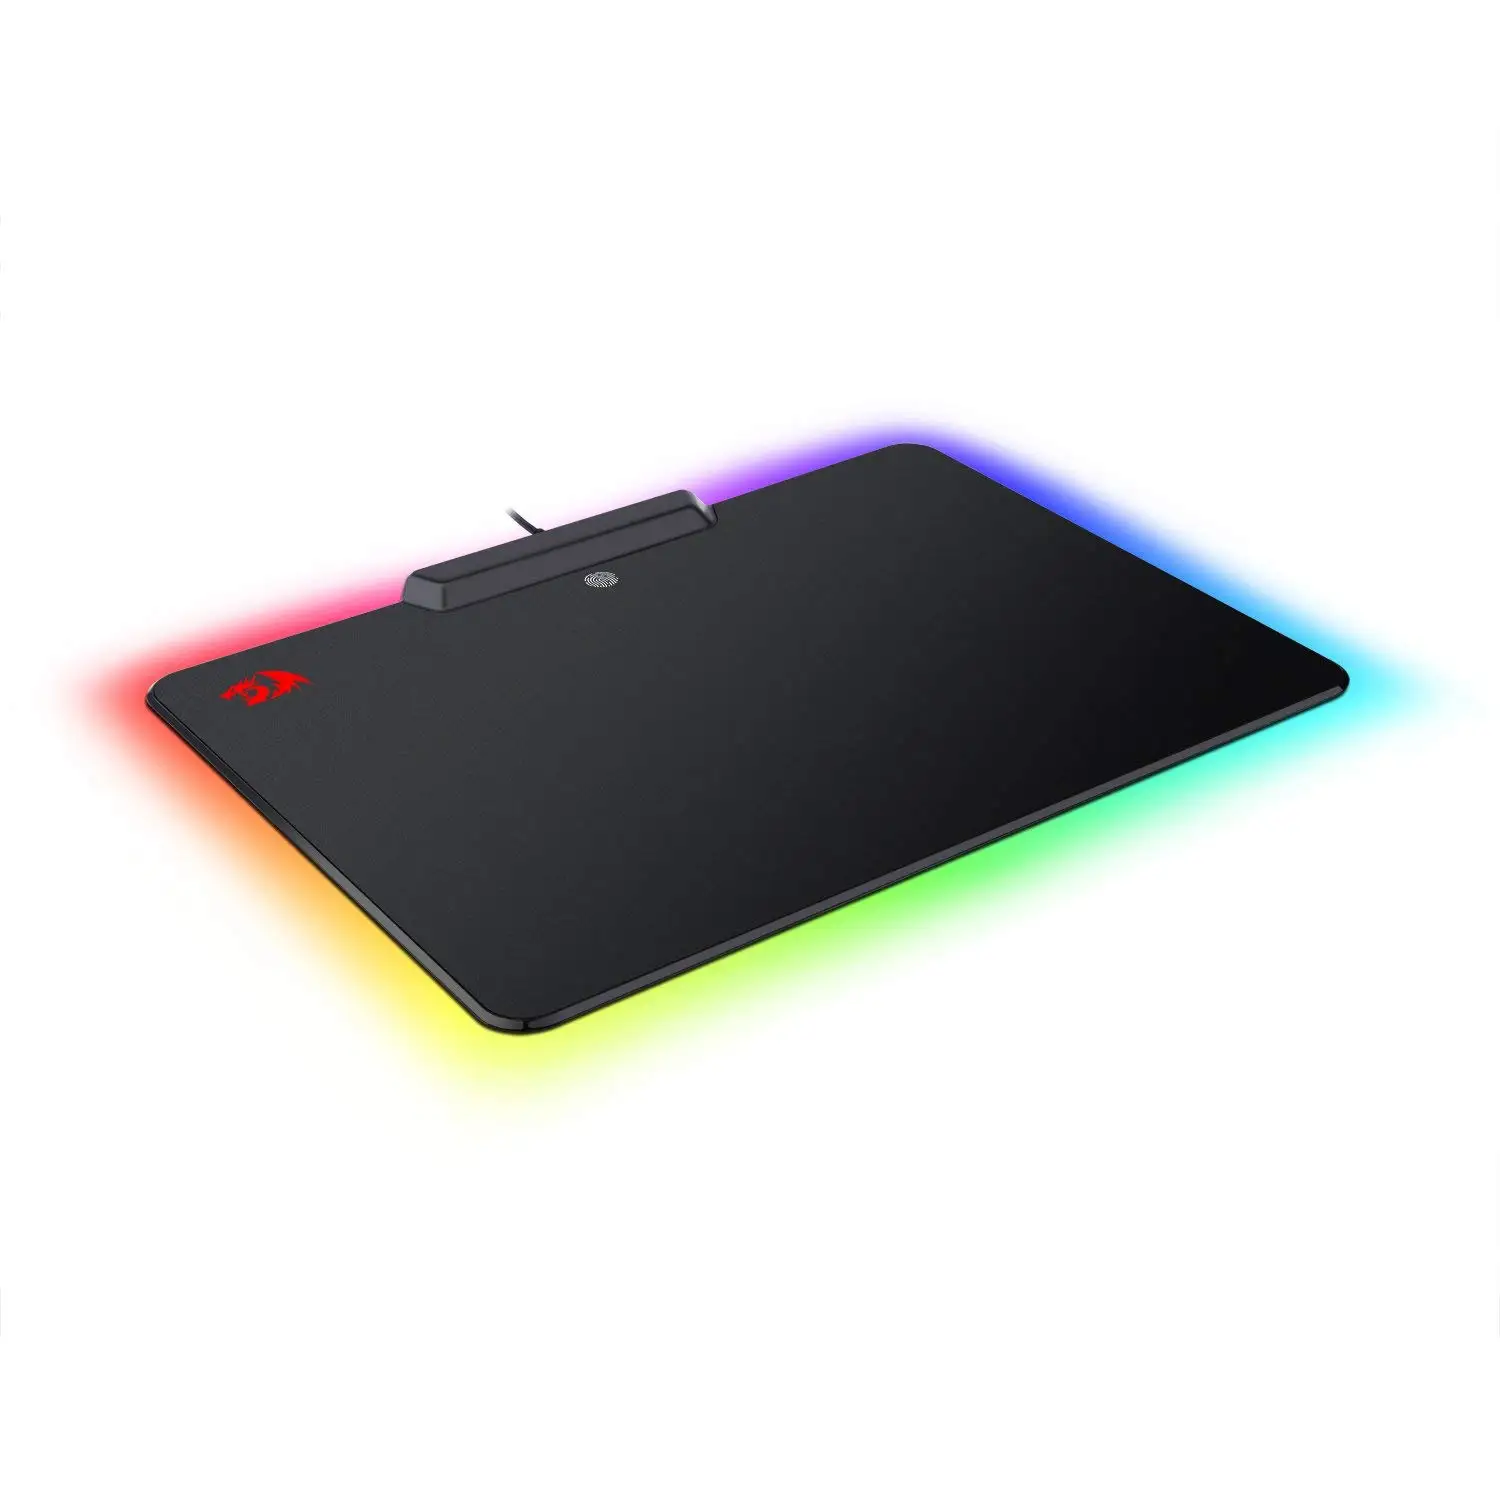 Redragon P009 Kylin Customizable 16.8 Million Colors RGB LED Gaming Mouse Pad